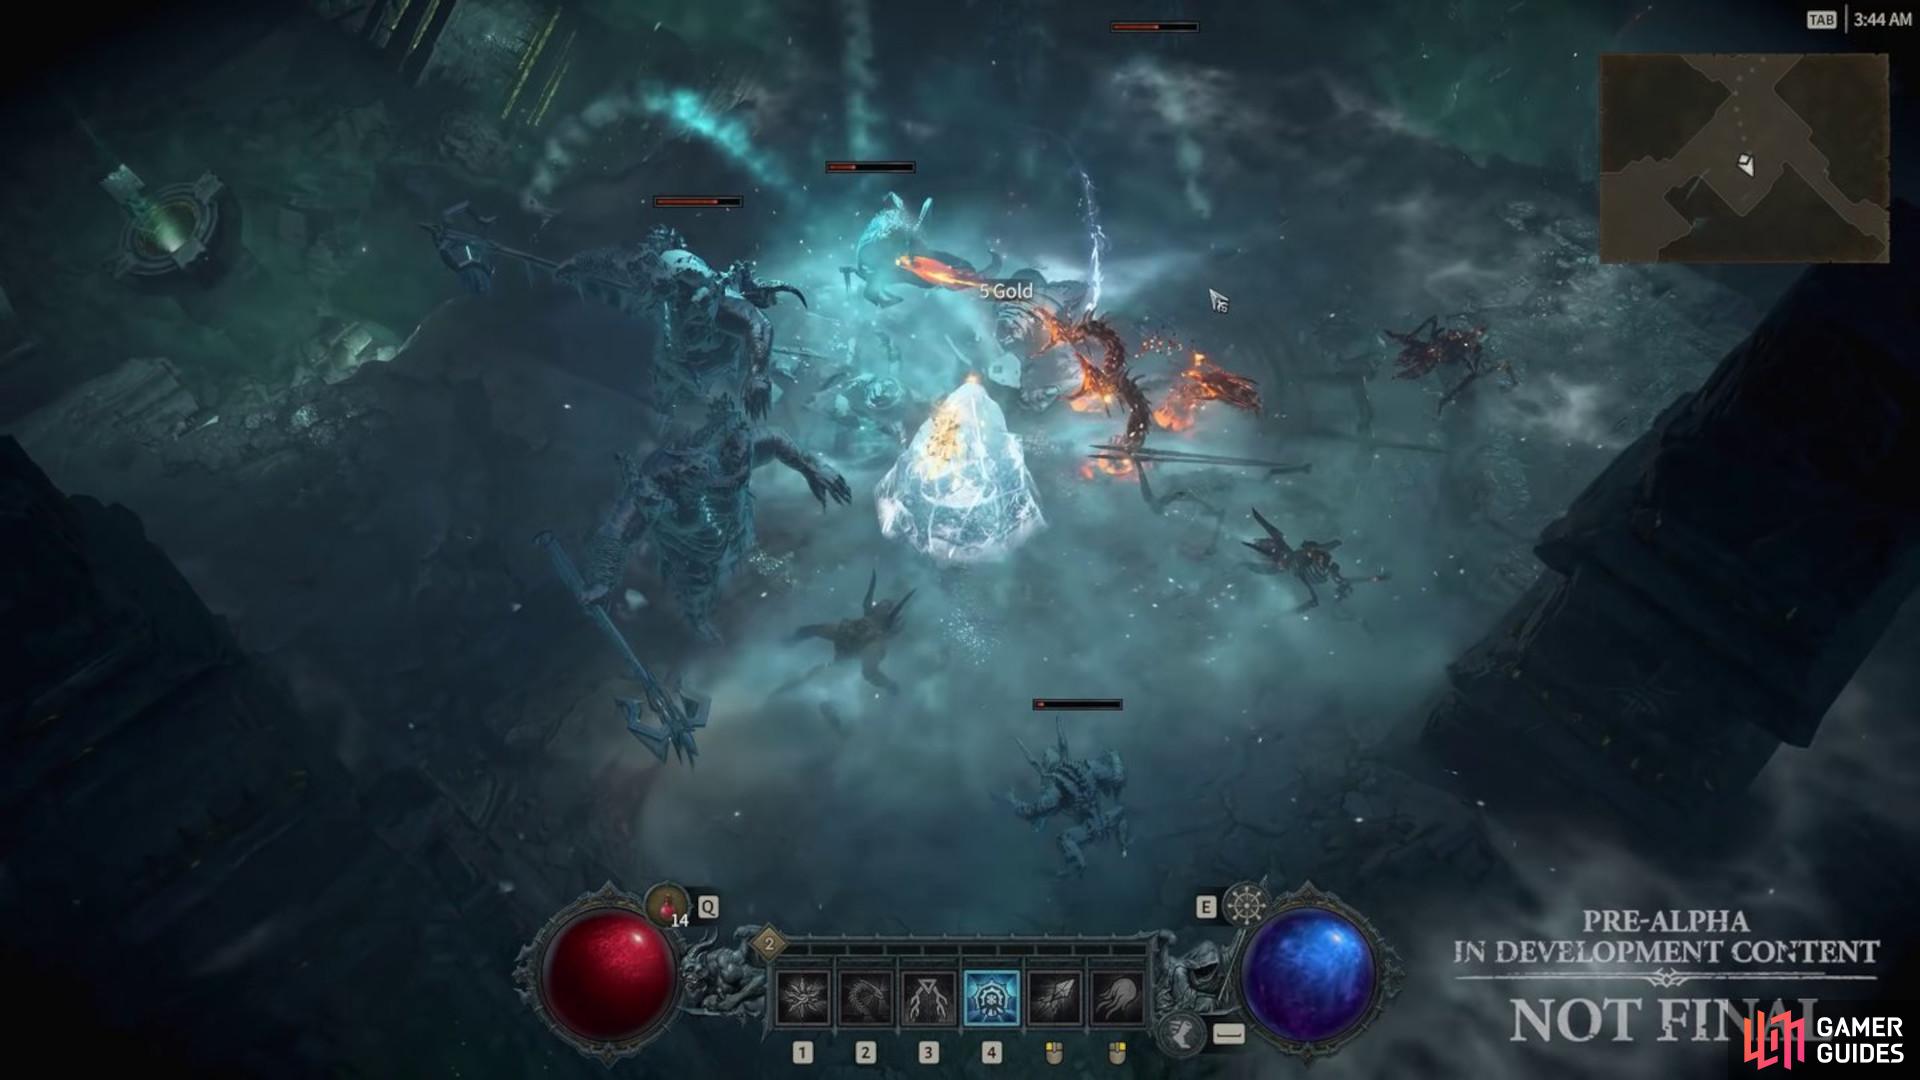 Freeze enemies, and shatter them to do incredibly frozen and vulnerable damage in this solid mix of AOE and single-target leveling build. Image via Blizzard Entertainment.